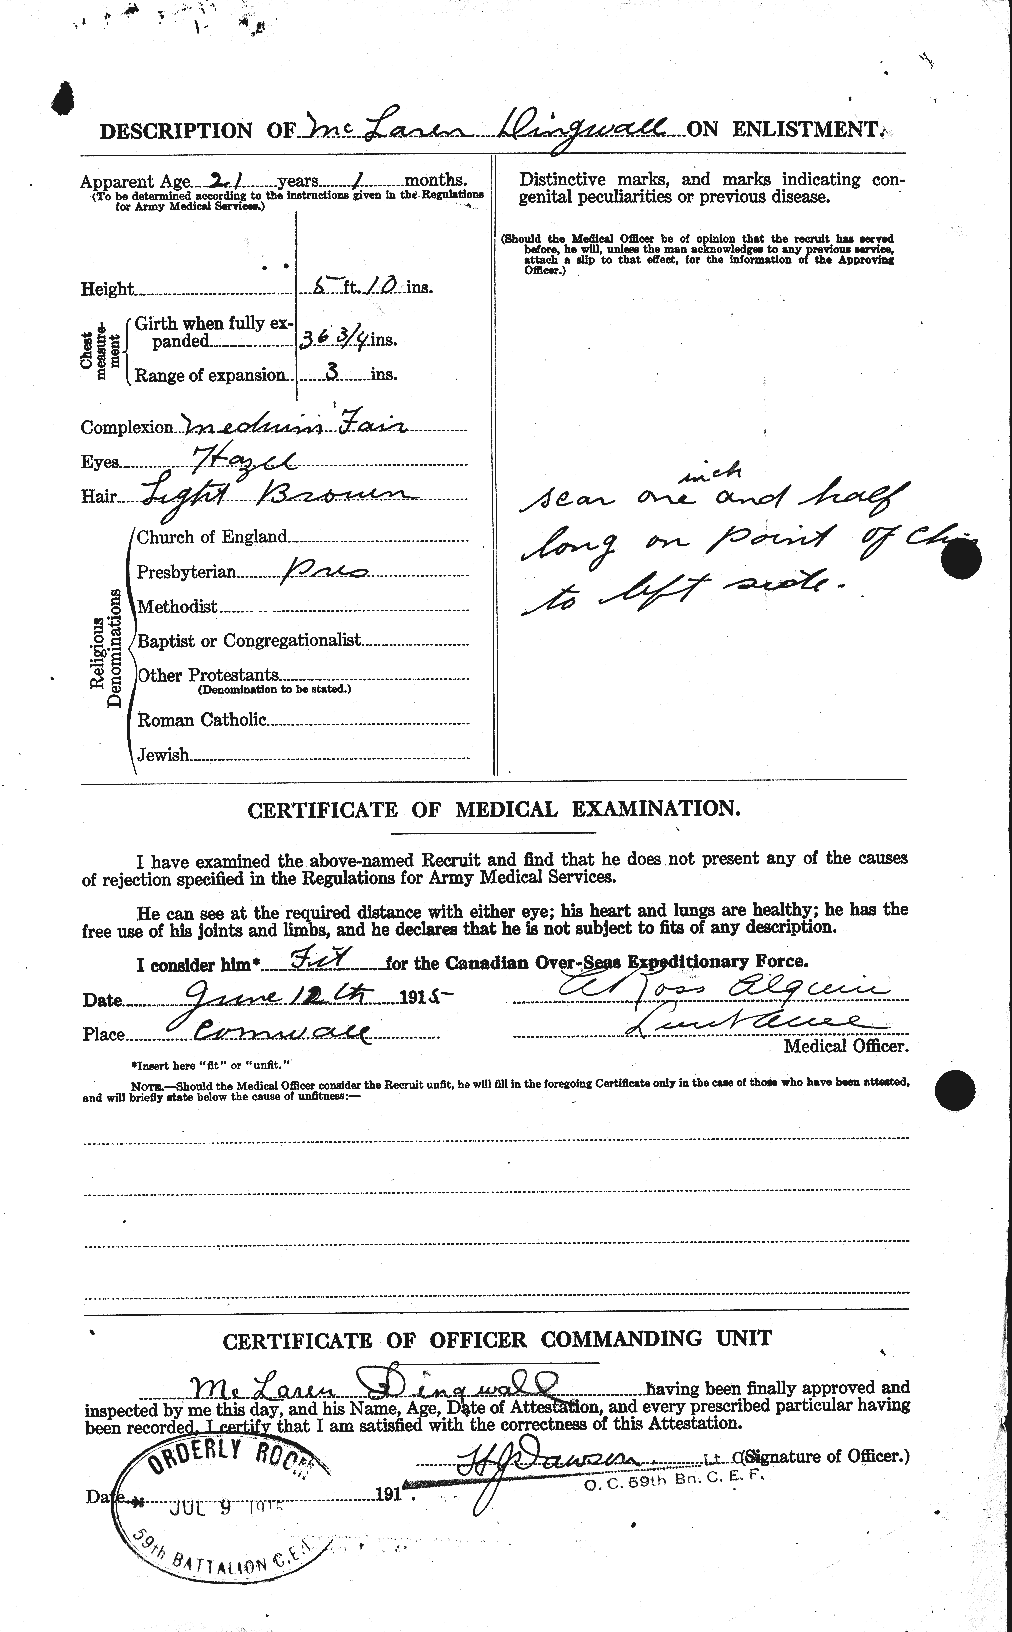 Personnel Records of the First World War - CEF 292310b